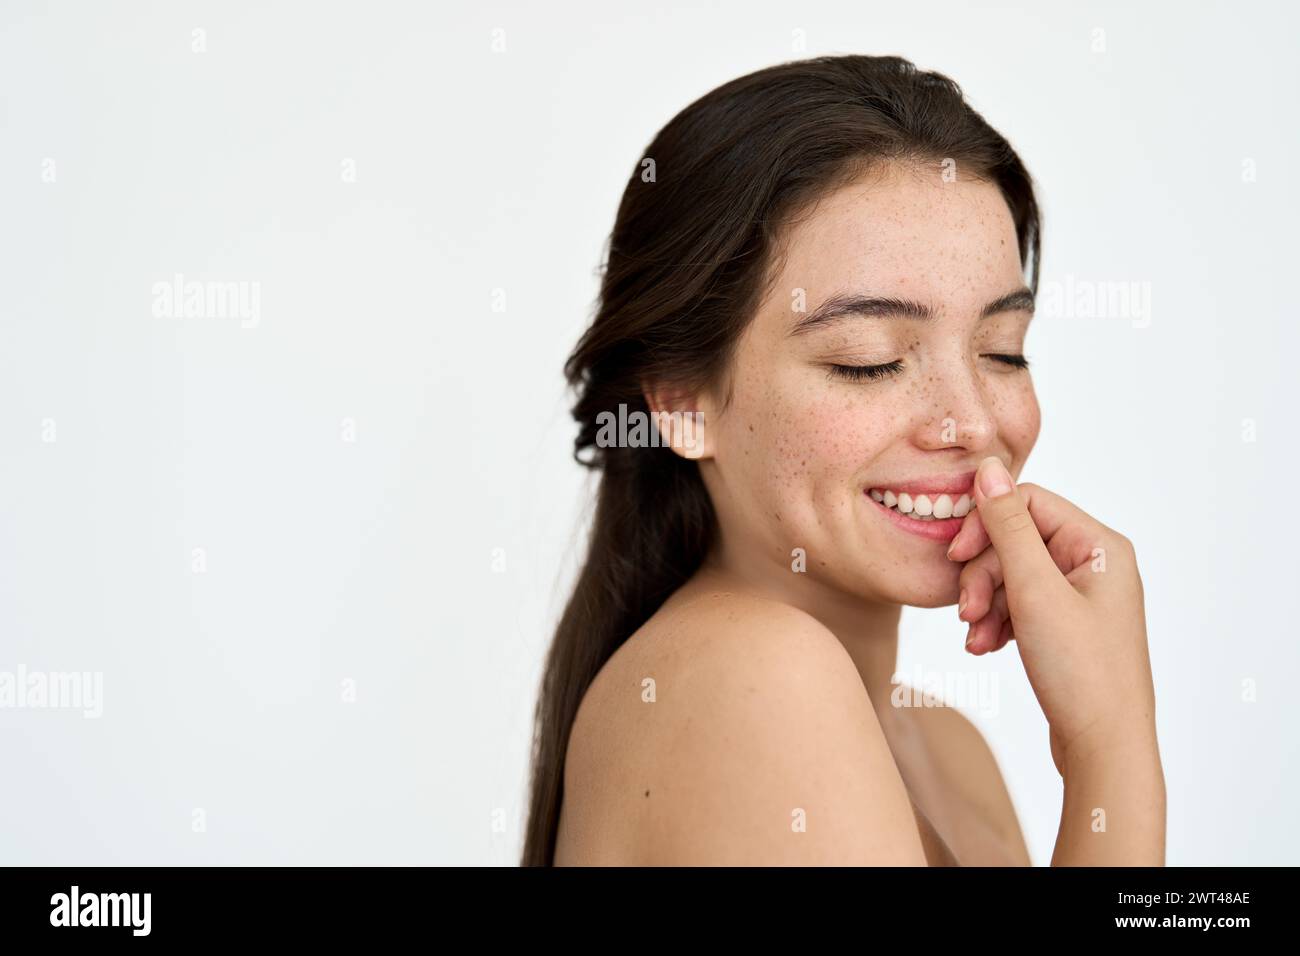 Happy Latin young woman with freckles on face isolated on white background. Stock Photo